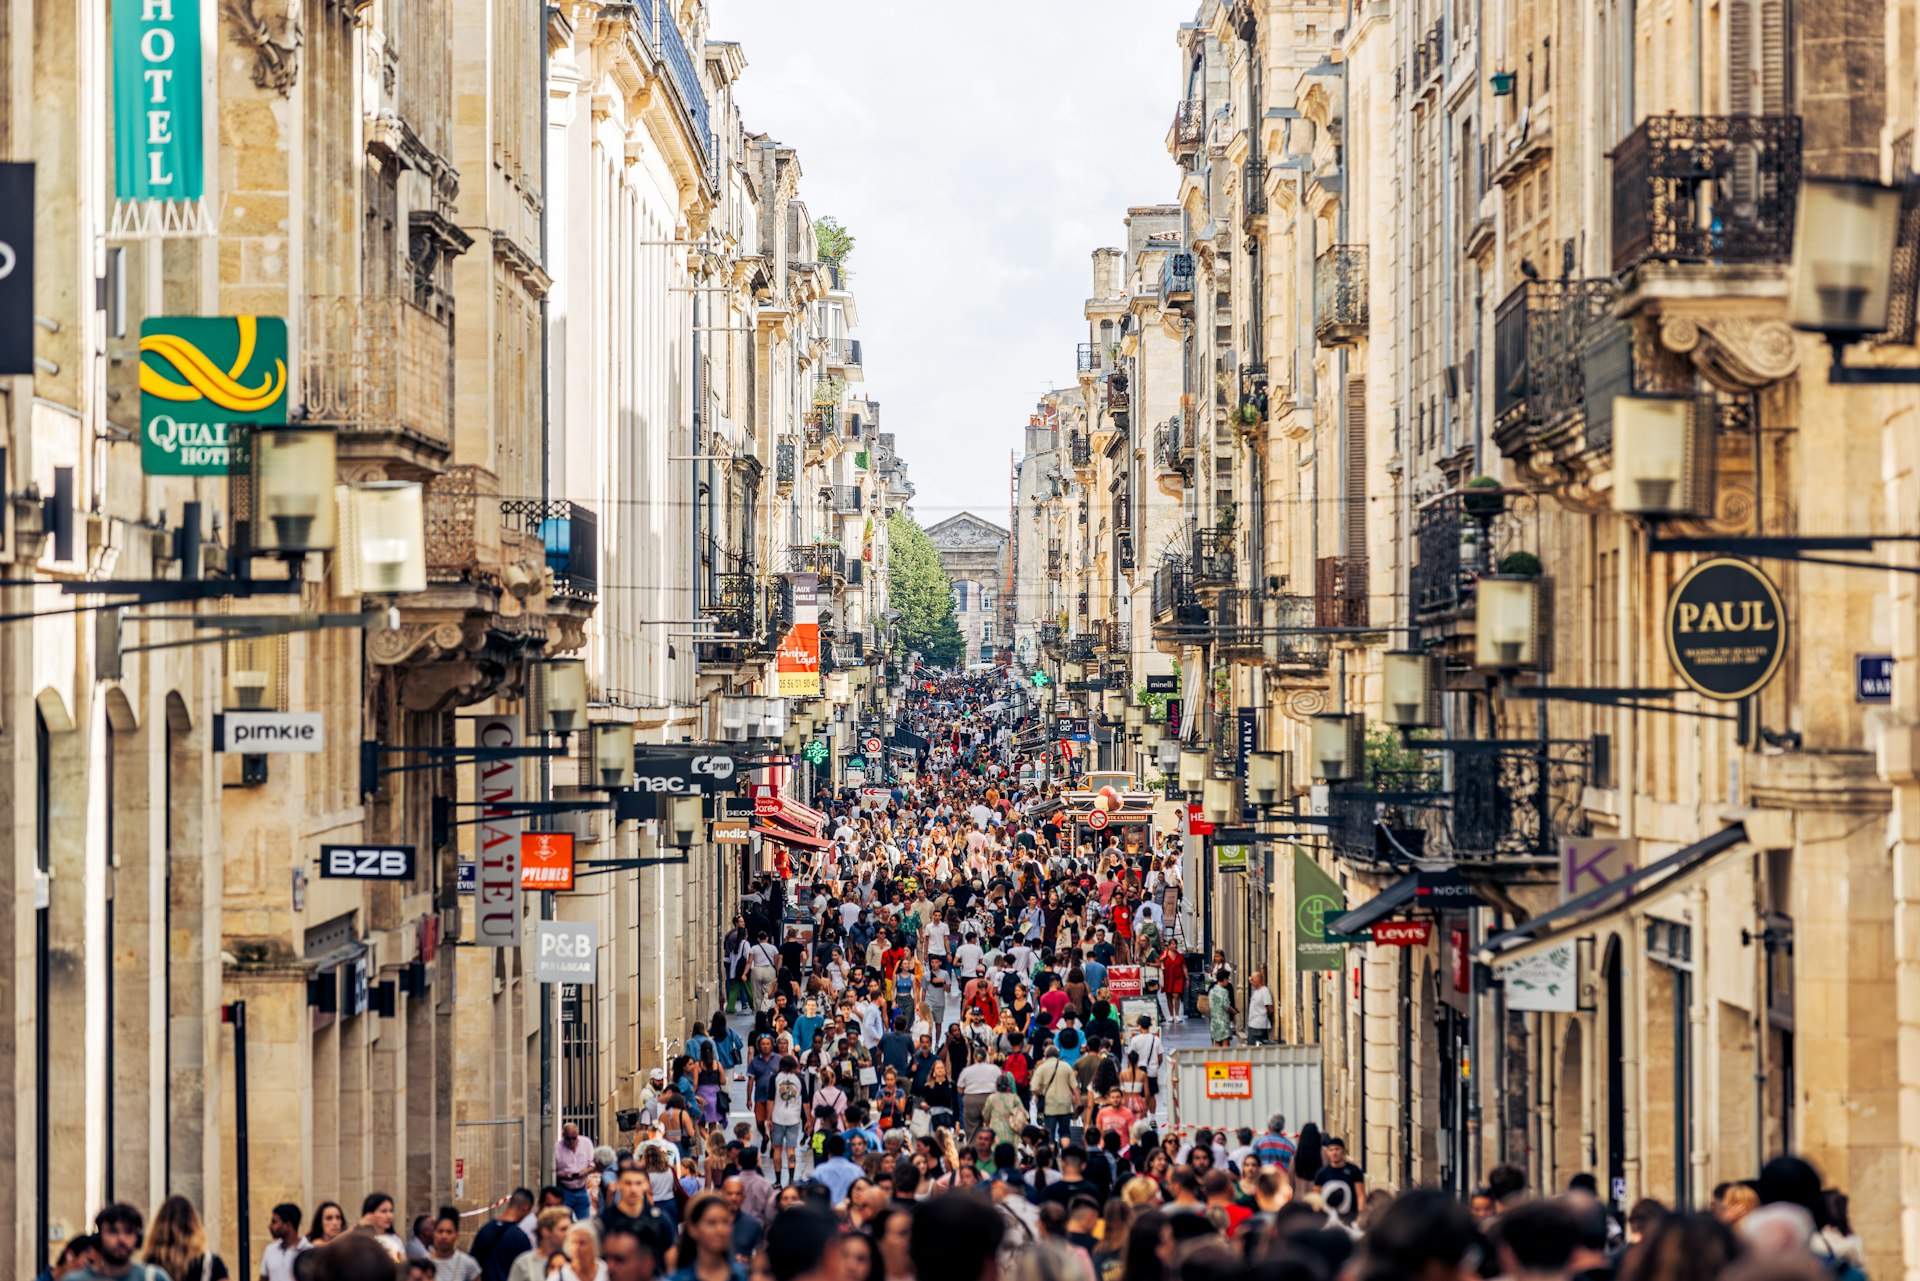 Crowd of people on a pedestrian shopping street, Bordeaux, Aquitaine, France